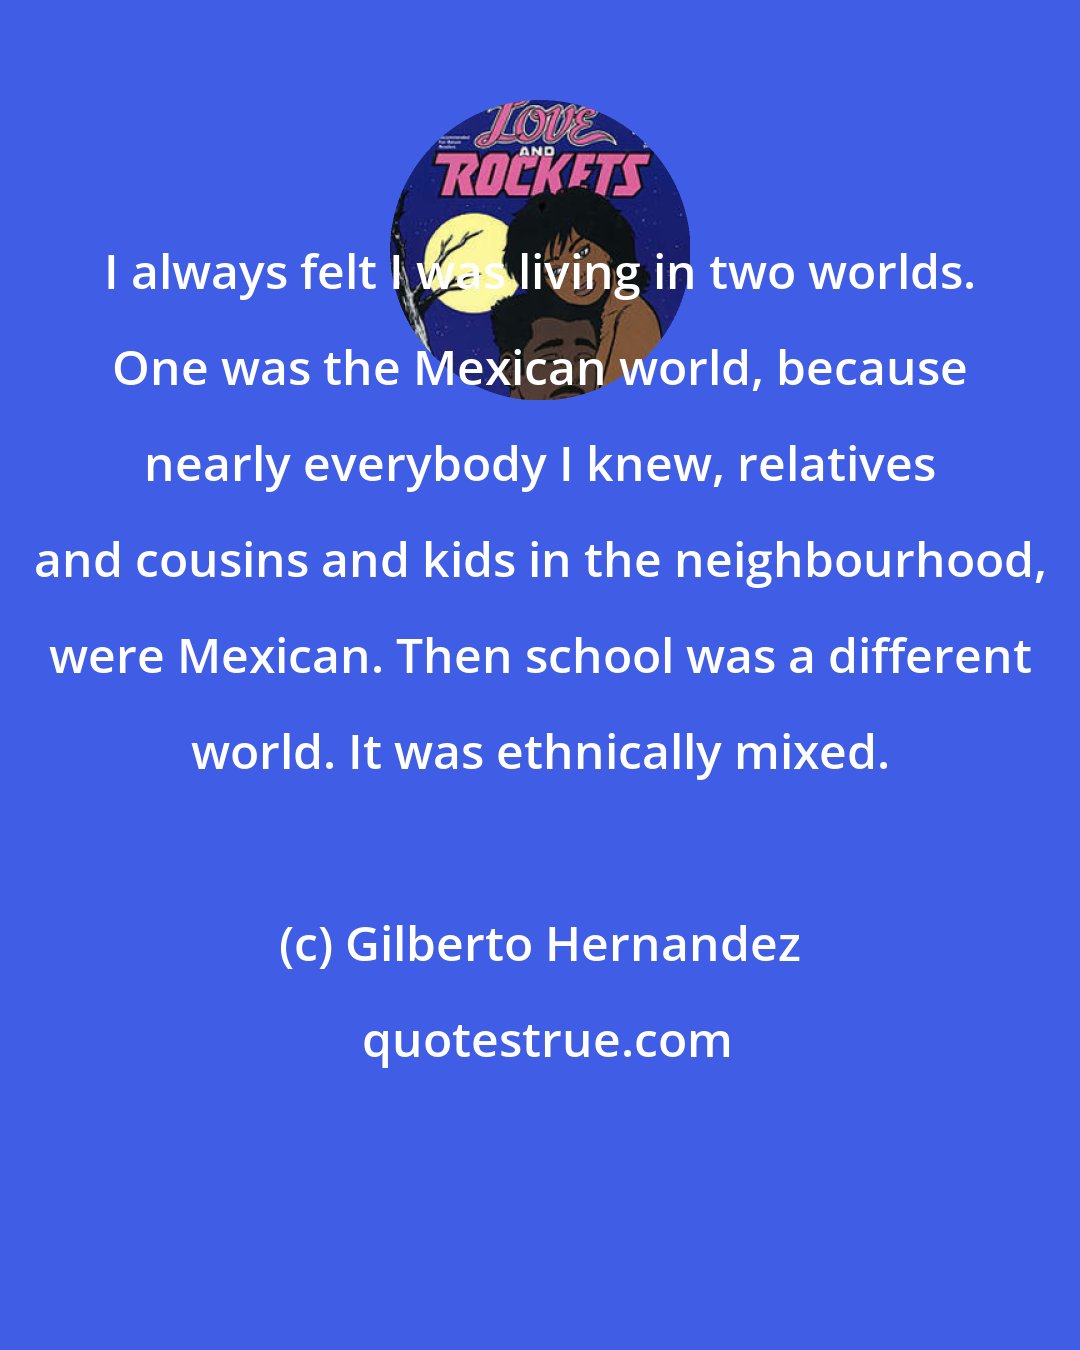 Gilberto Hernandez: I always felt I was living in two worlds. One was the Mexican world, because nearly everybody I knew, relatives and cousins and kids in the neighbourhood, were Mexican. Then school was a different world. It was ethnically mixed.